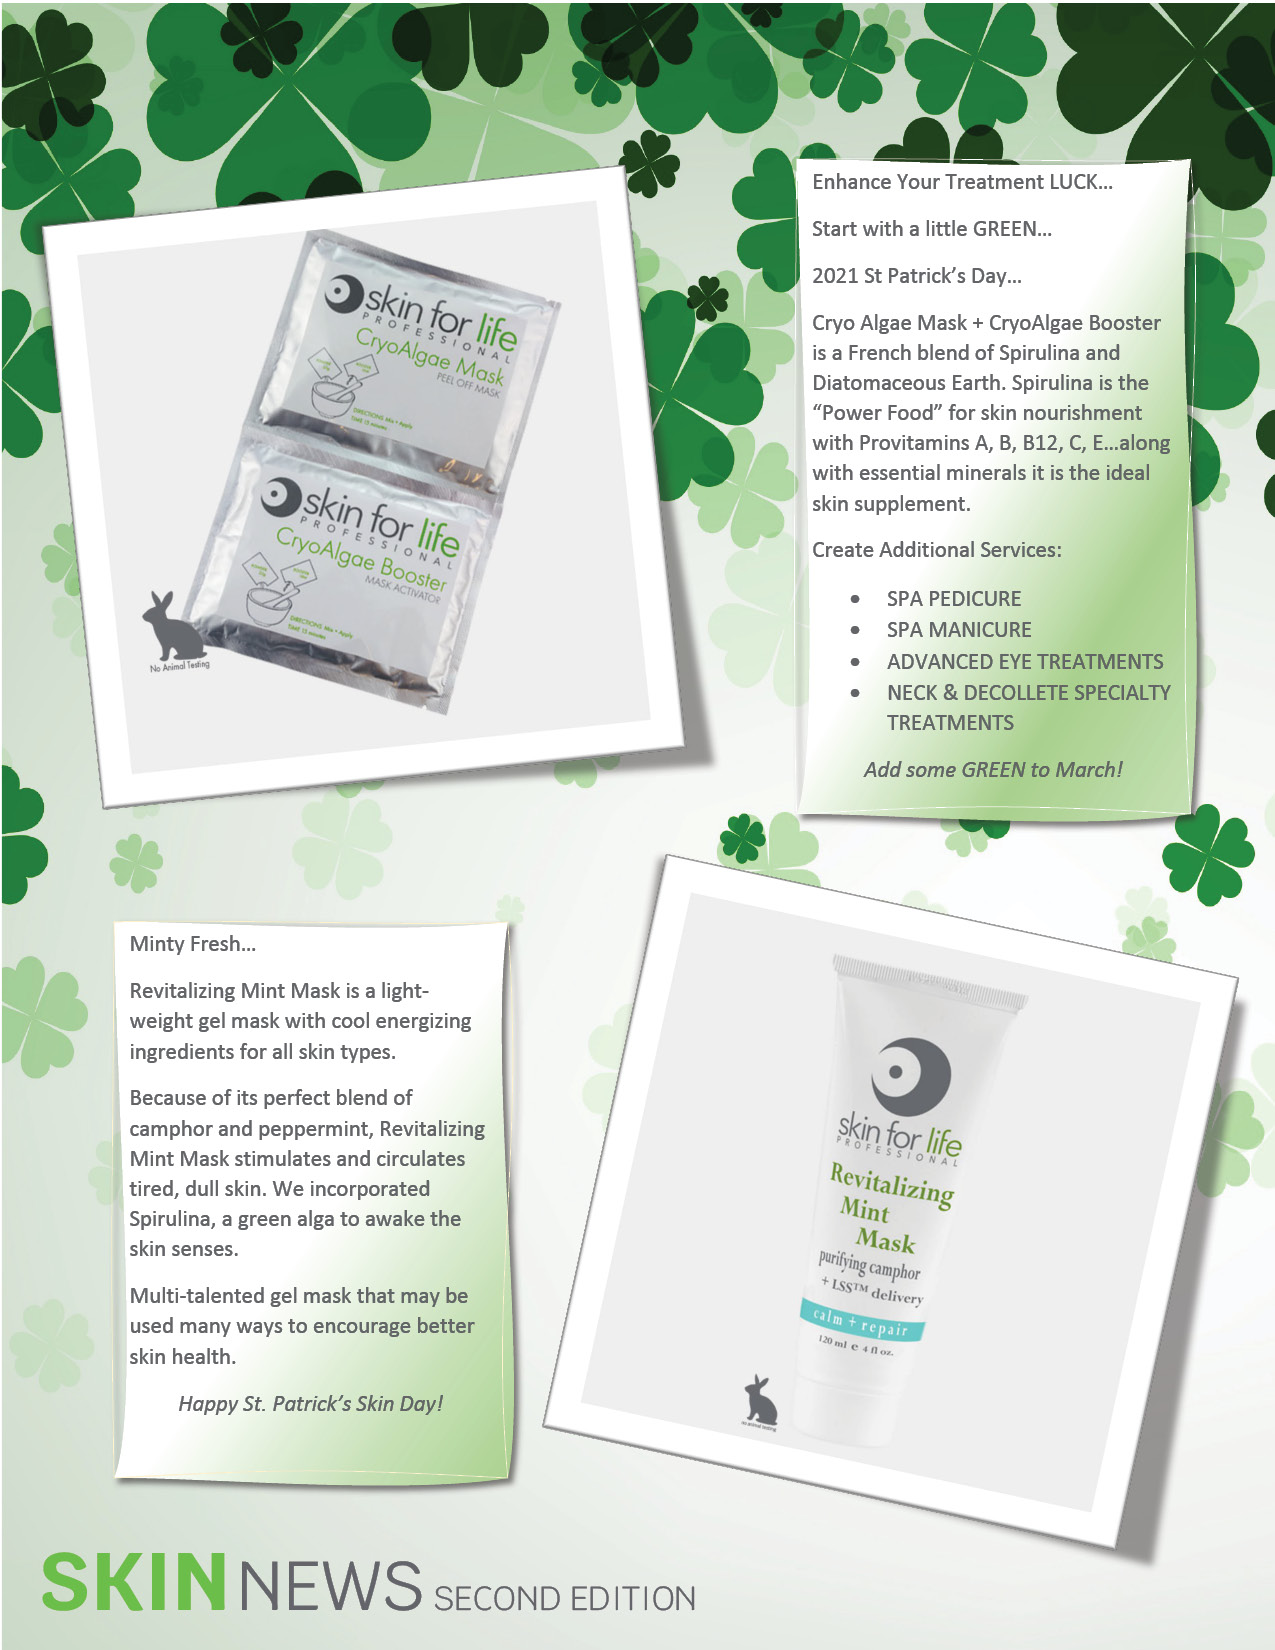 SKIN News second edition | St. Patrick's Skin Month.